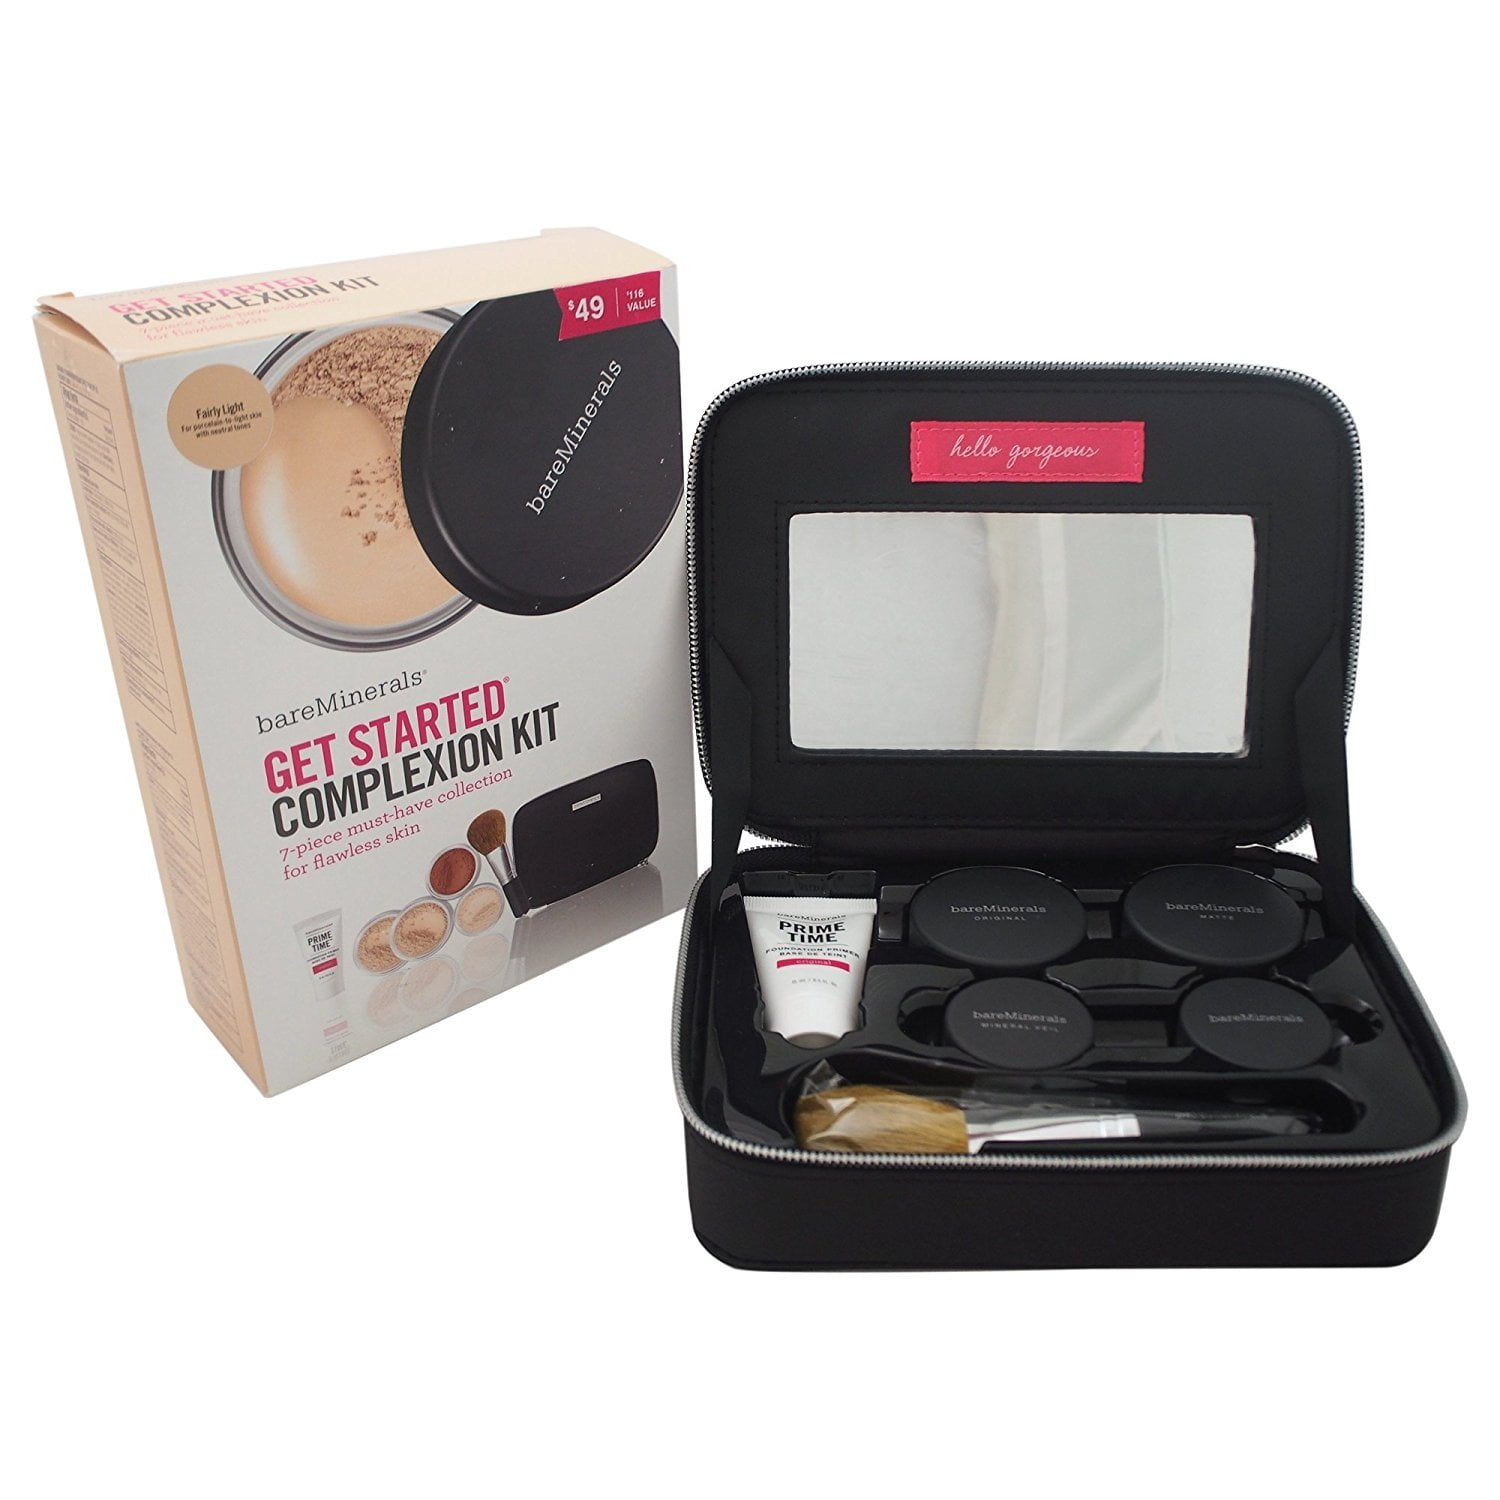 Get Started 7 Piece Complexion Kit, Fairly - Walmart.com